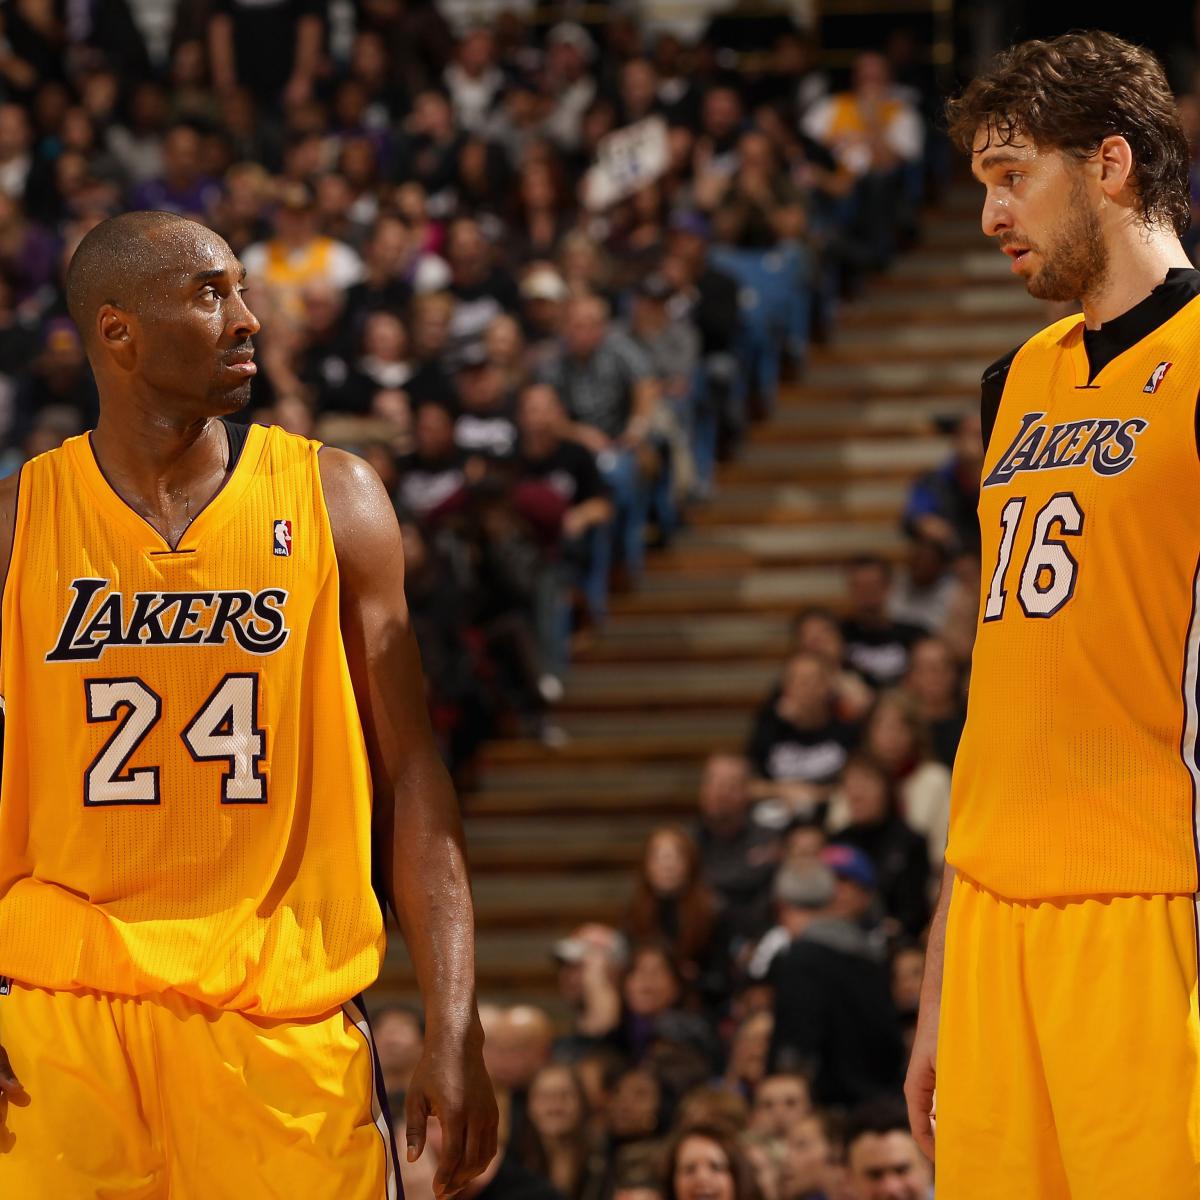 Los Angeles Lakers vs. Sacramento Kings: Preview, Analysis and